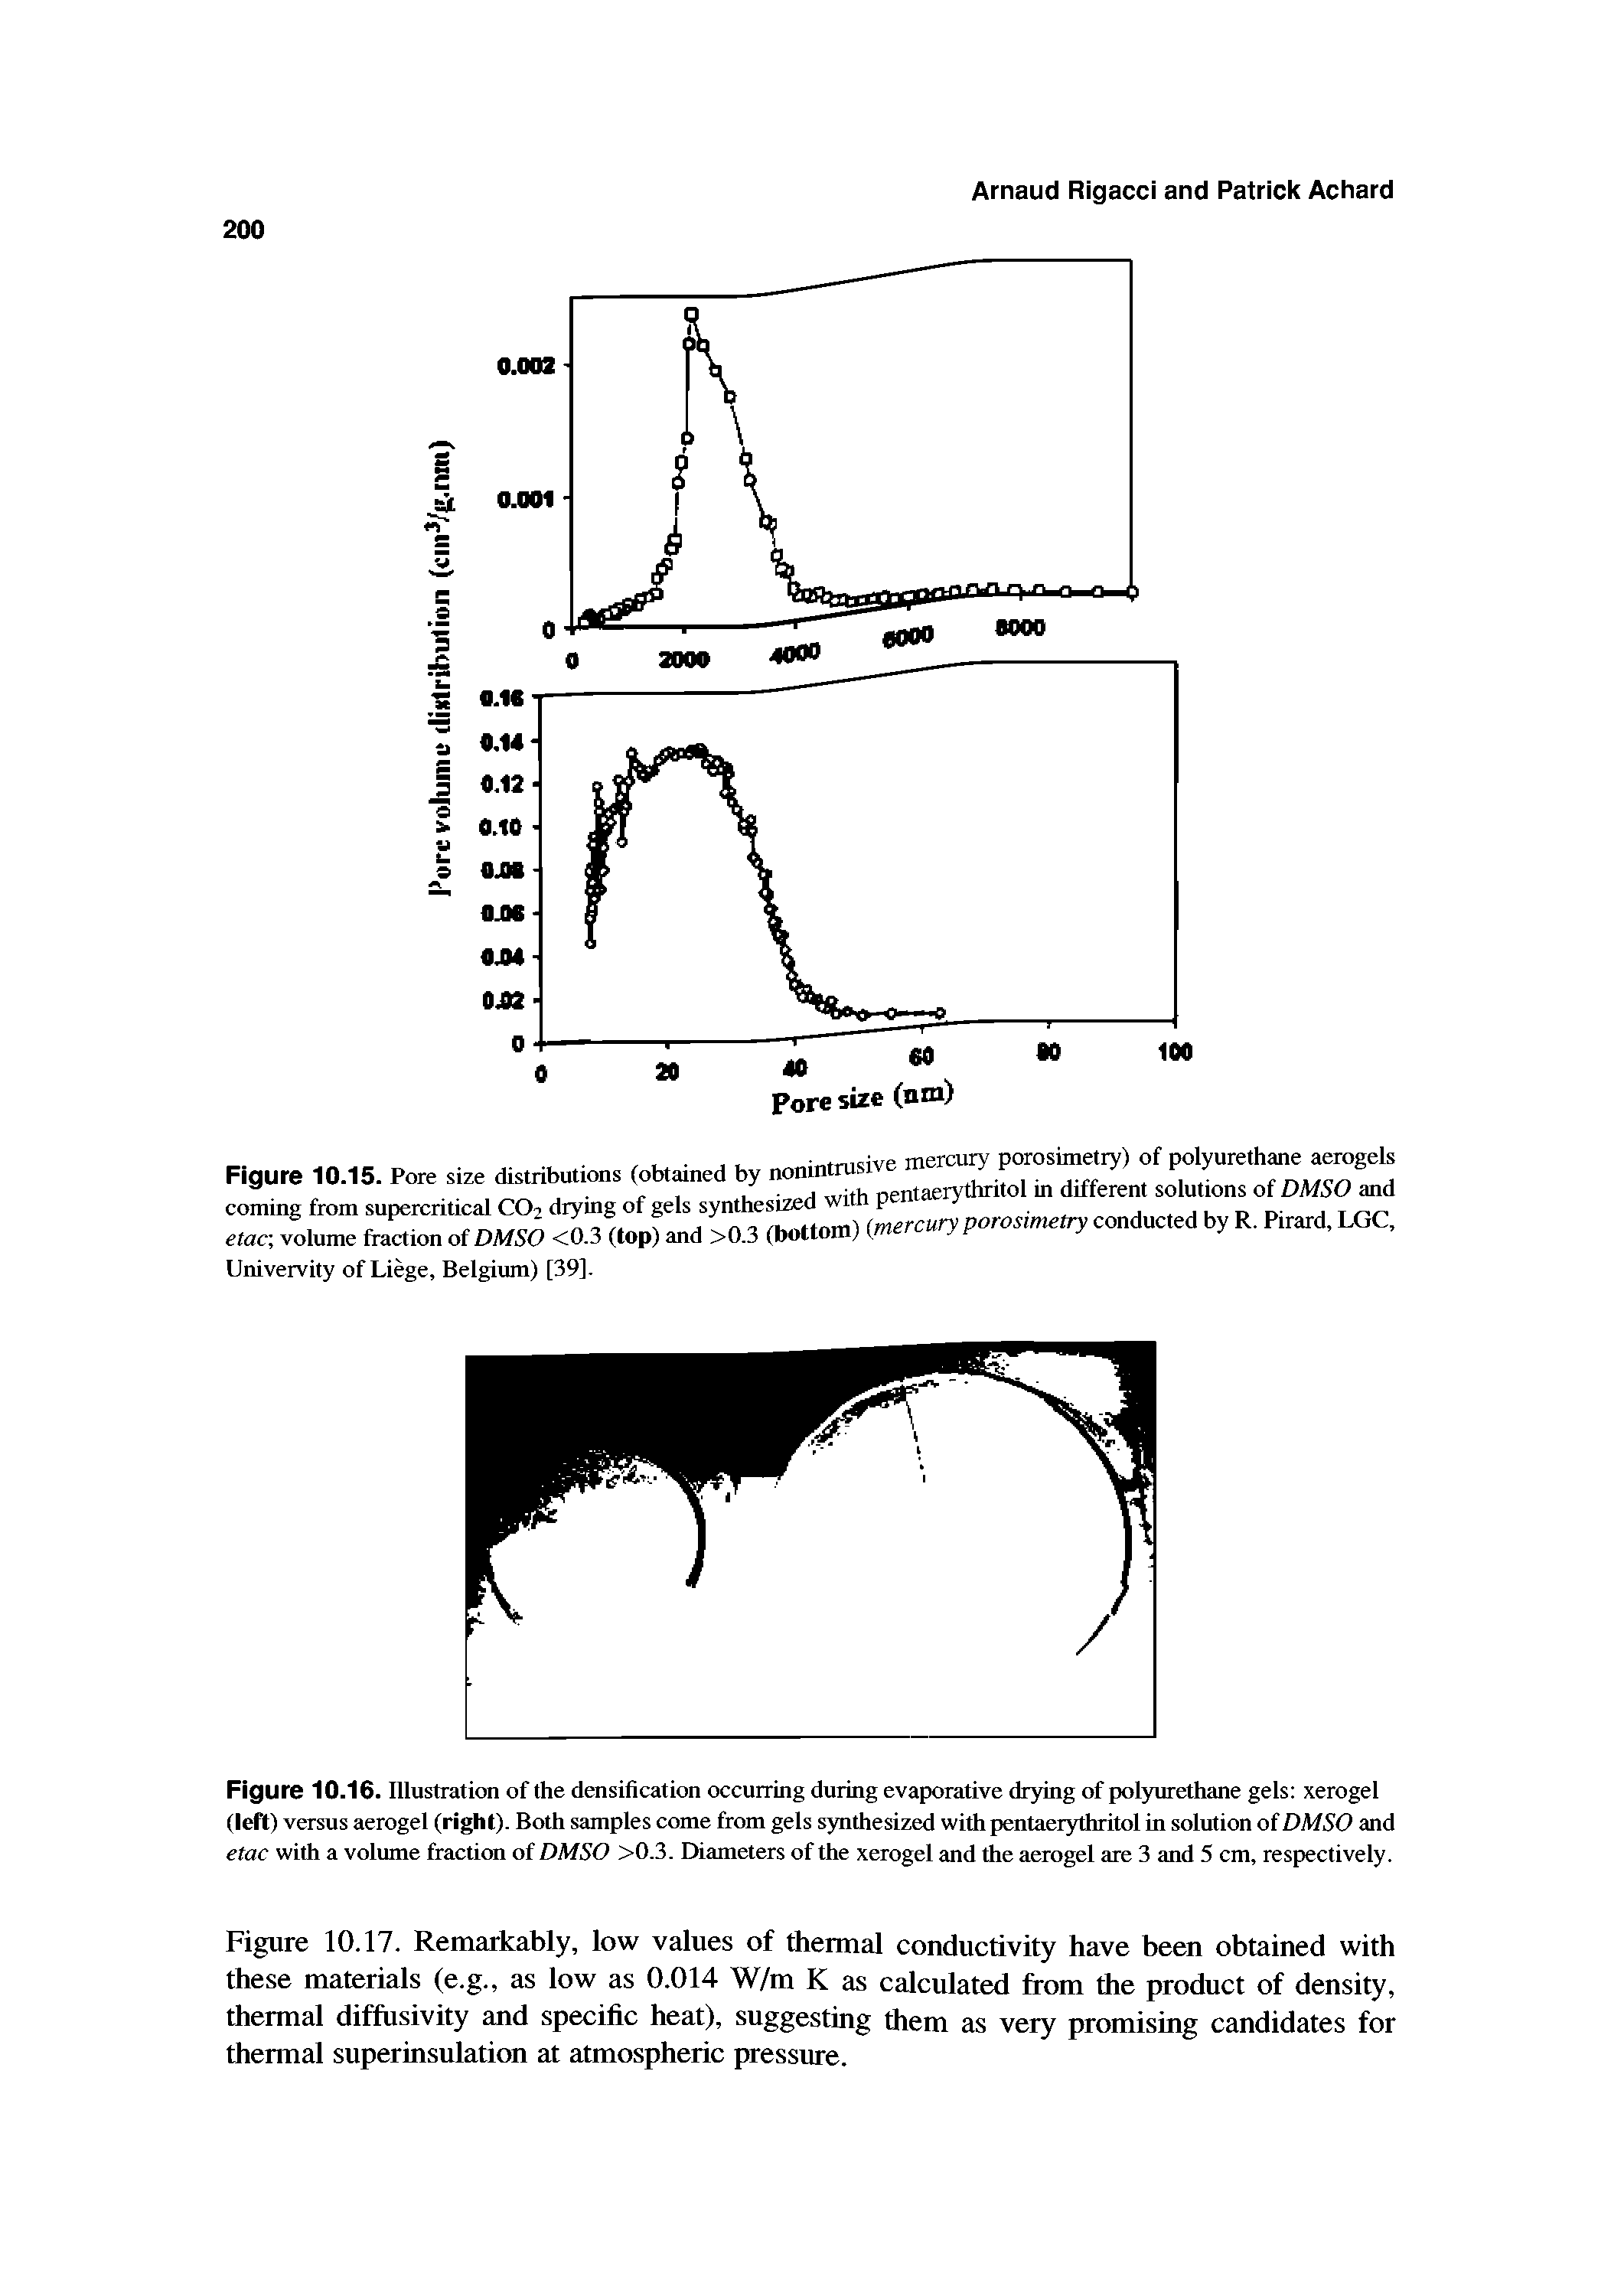 Figure 10.17. Remarkably, low values of thermal conductivity have been obtained with these materials (e.g., as low as 0.014 W/m K as calculated from the product of density, thermal diffiisivity and specific heat), suggesting them as very promising candidates for themial superinsulation at atmospheric pressure.